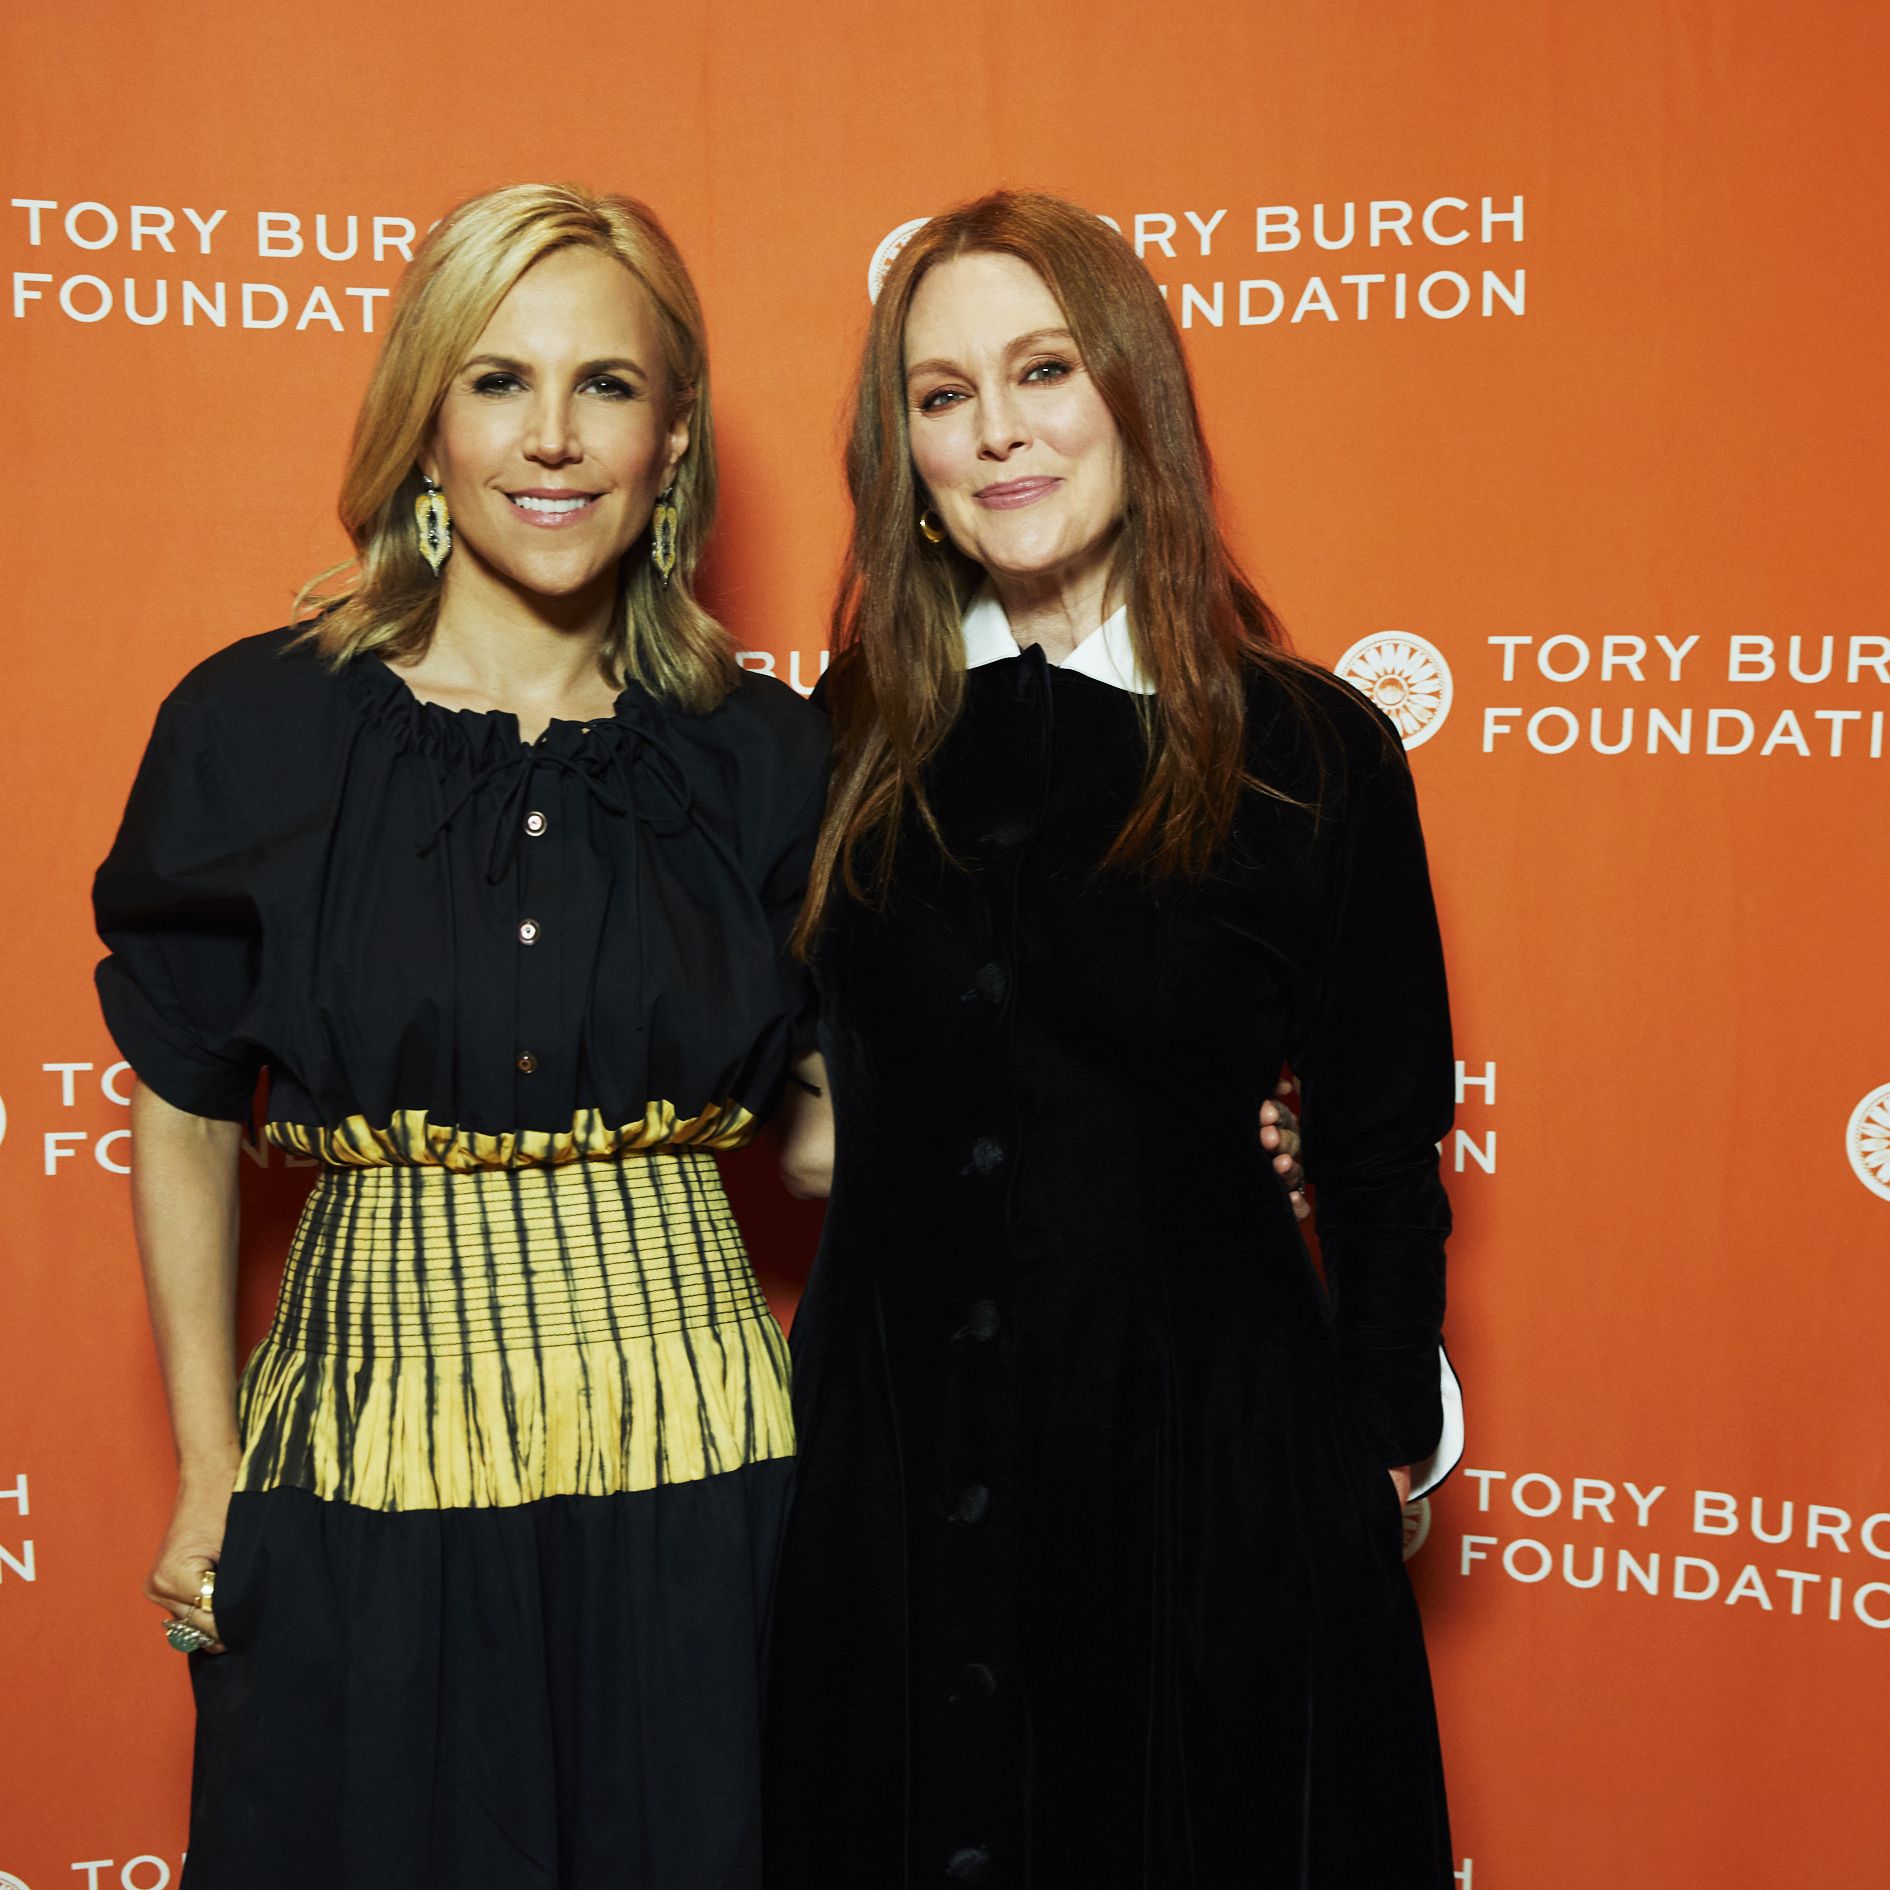 At the Embrace Ambition summit, the designer brought together leaders like Julianne Moore and Mindy Kaling to discuss confronting stereotypes and creating new norms.